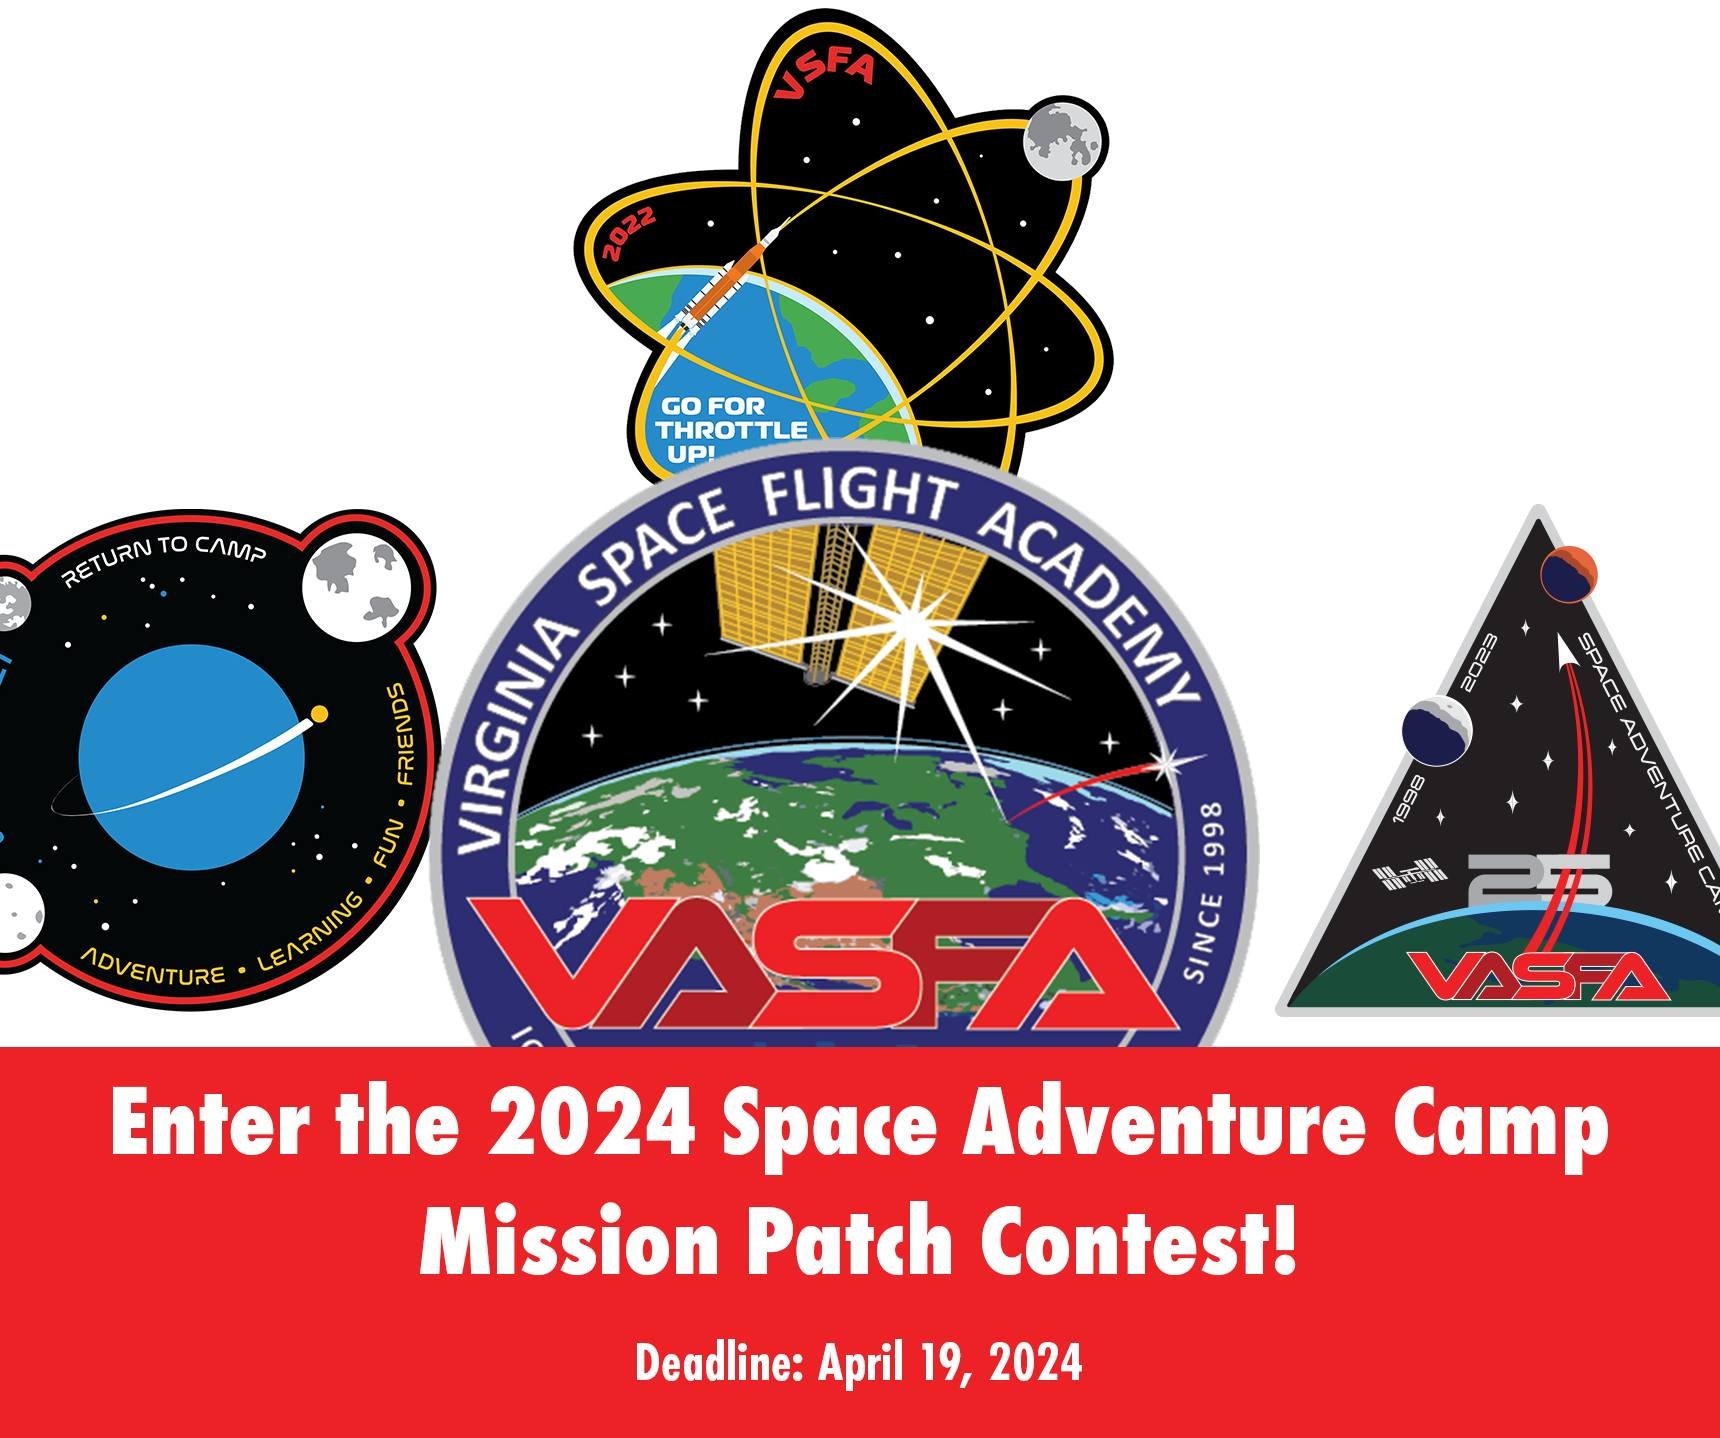 🚀🌟 Attention all Space Adventure Campers! 🌟🚀

Time is ticking away like a rocket soaring through the cosmos! 🕒⏳ Don't miss your chance to etch your mark on the 2024 Space Adventure Camp Mission Patch Design. 🎨✨ Your creativity could be the shin